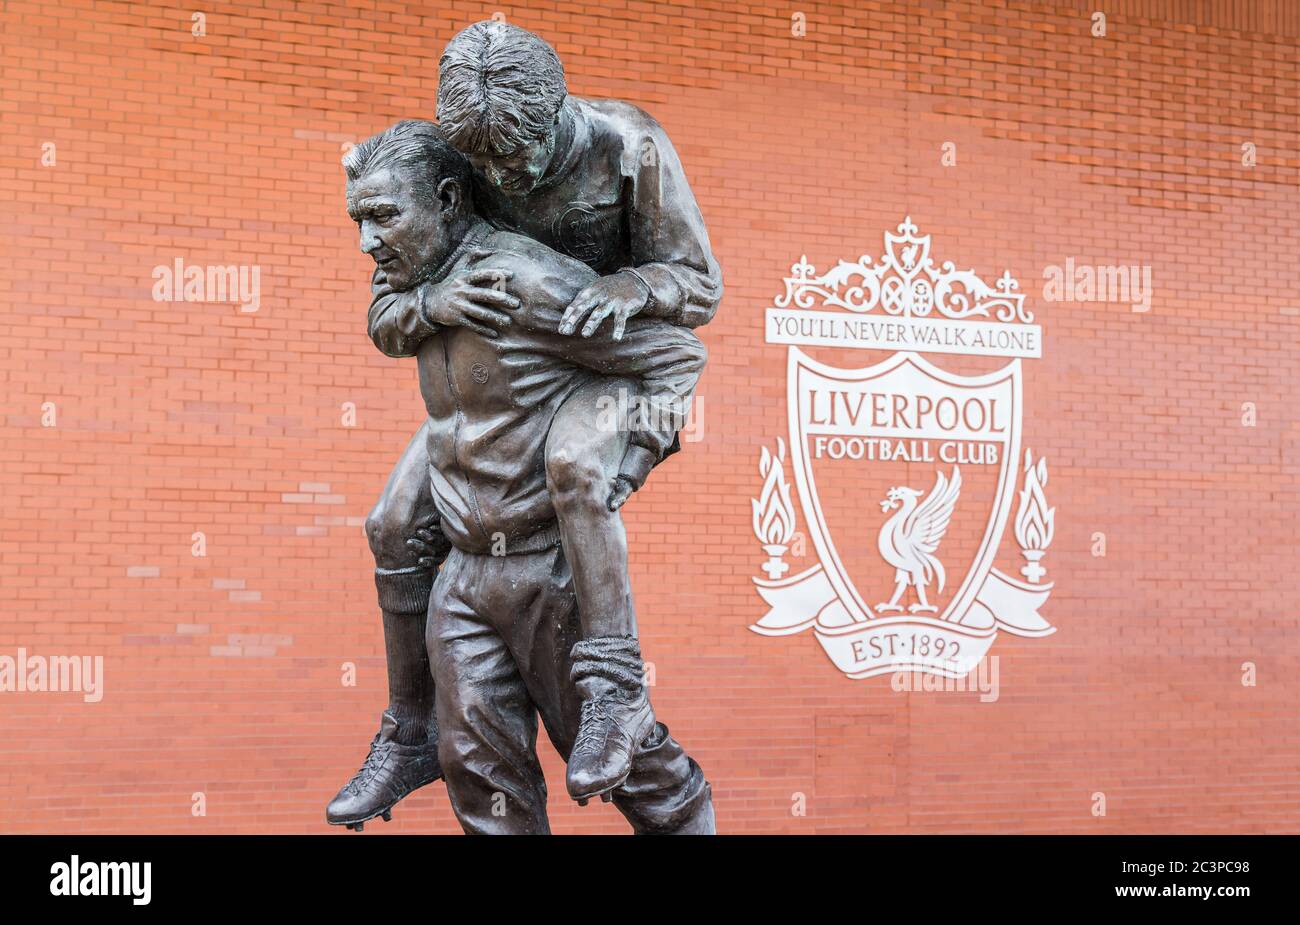 Statue of Bob Paisley carrying Emlyn Hughes seen at Anfield stadium in Liverpool (England) in June 2020.  Paisley is one of the most successful Englis Stock Photo